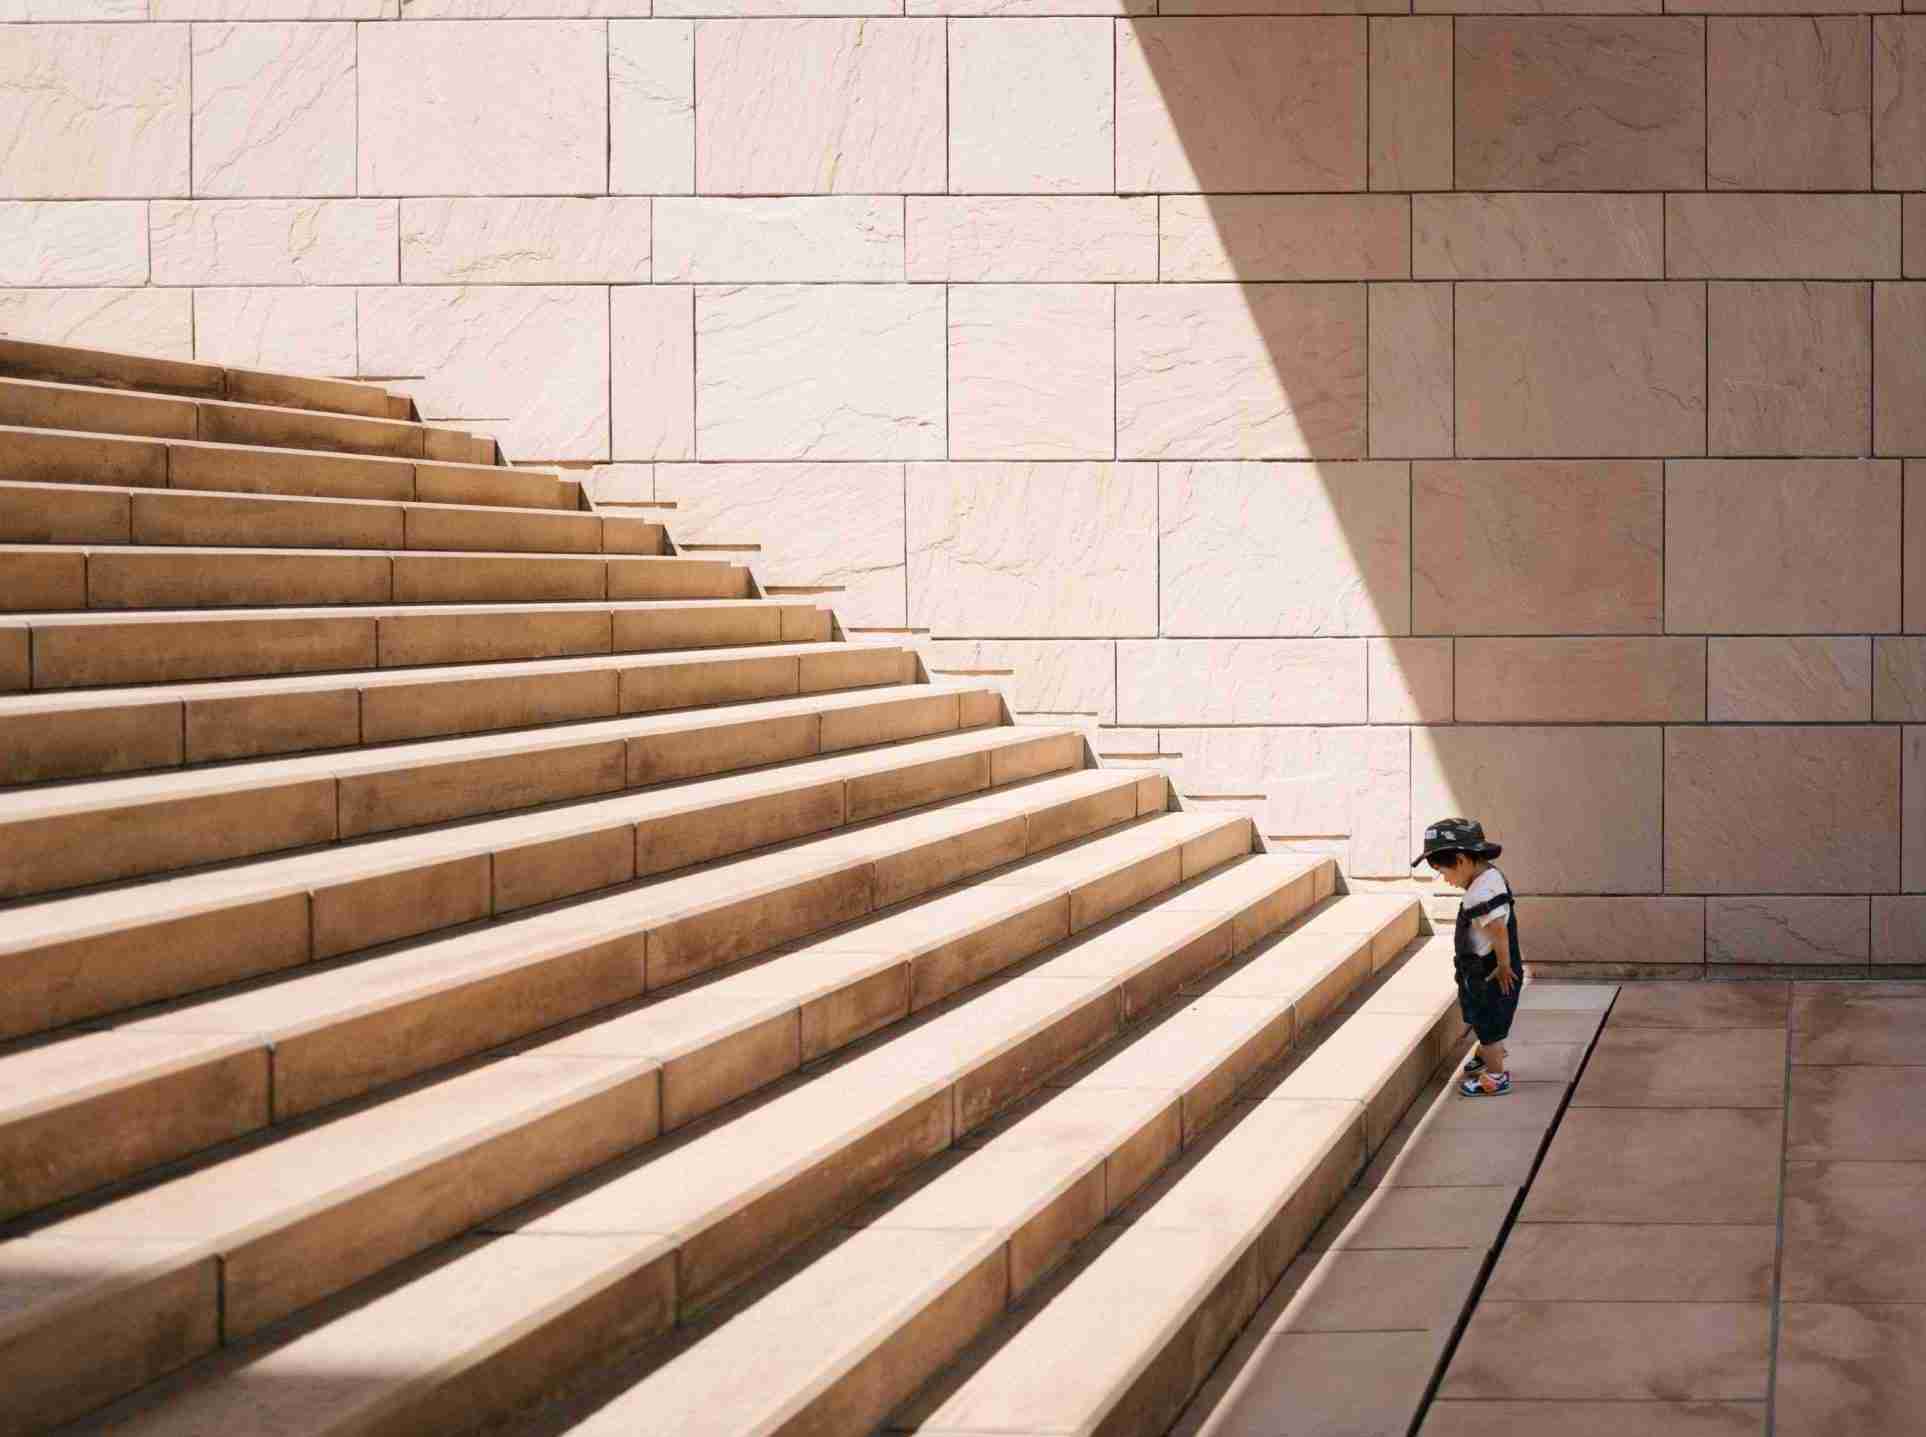 Staircase representing the need to create a set of steps as part of your implementation roadmap for your Business Strategy